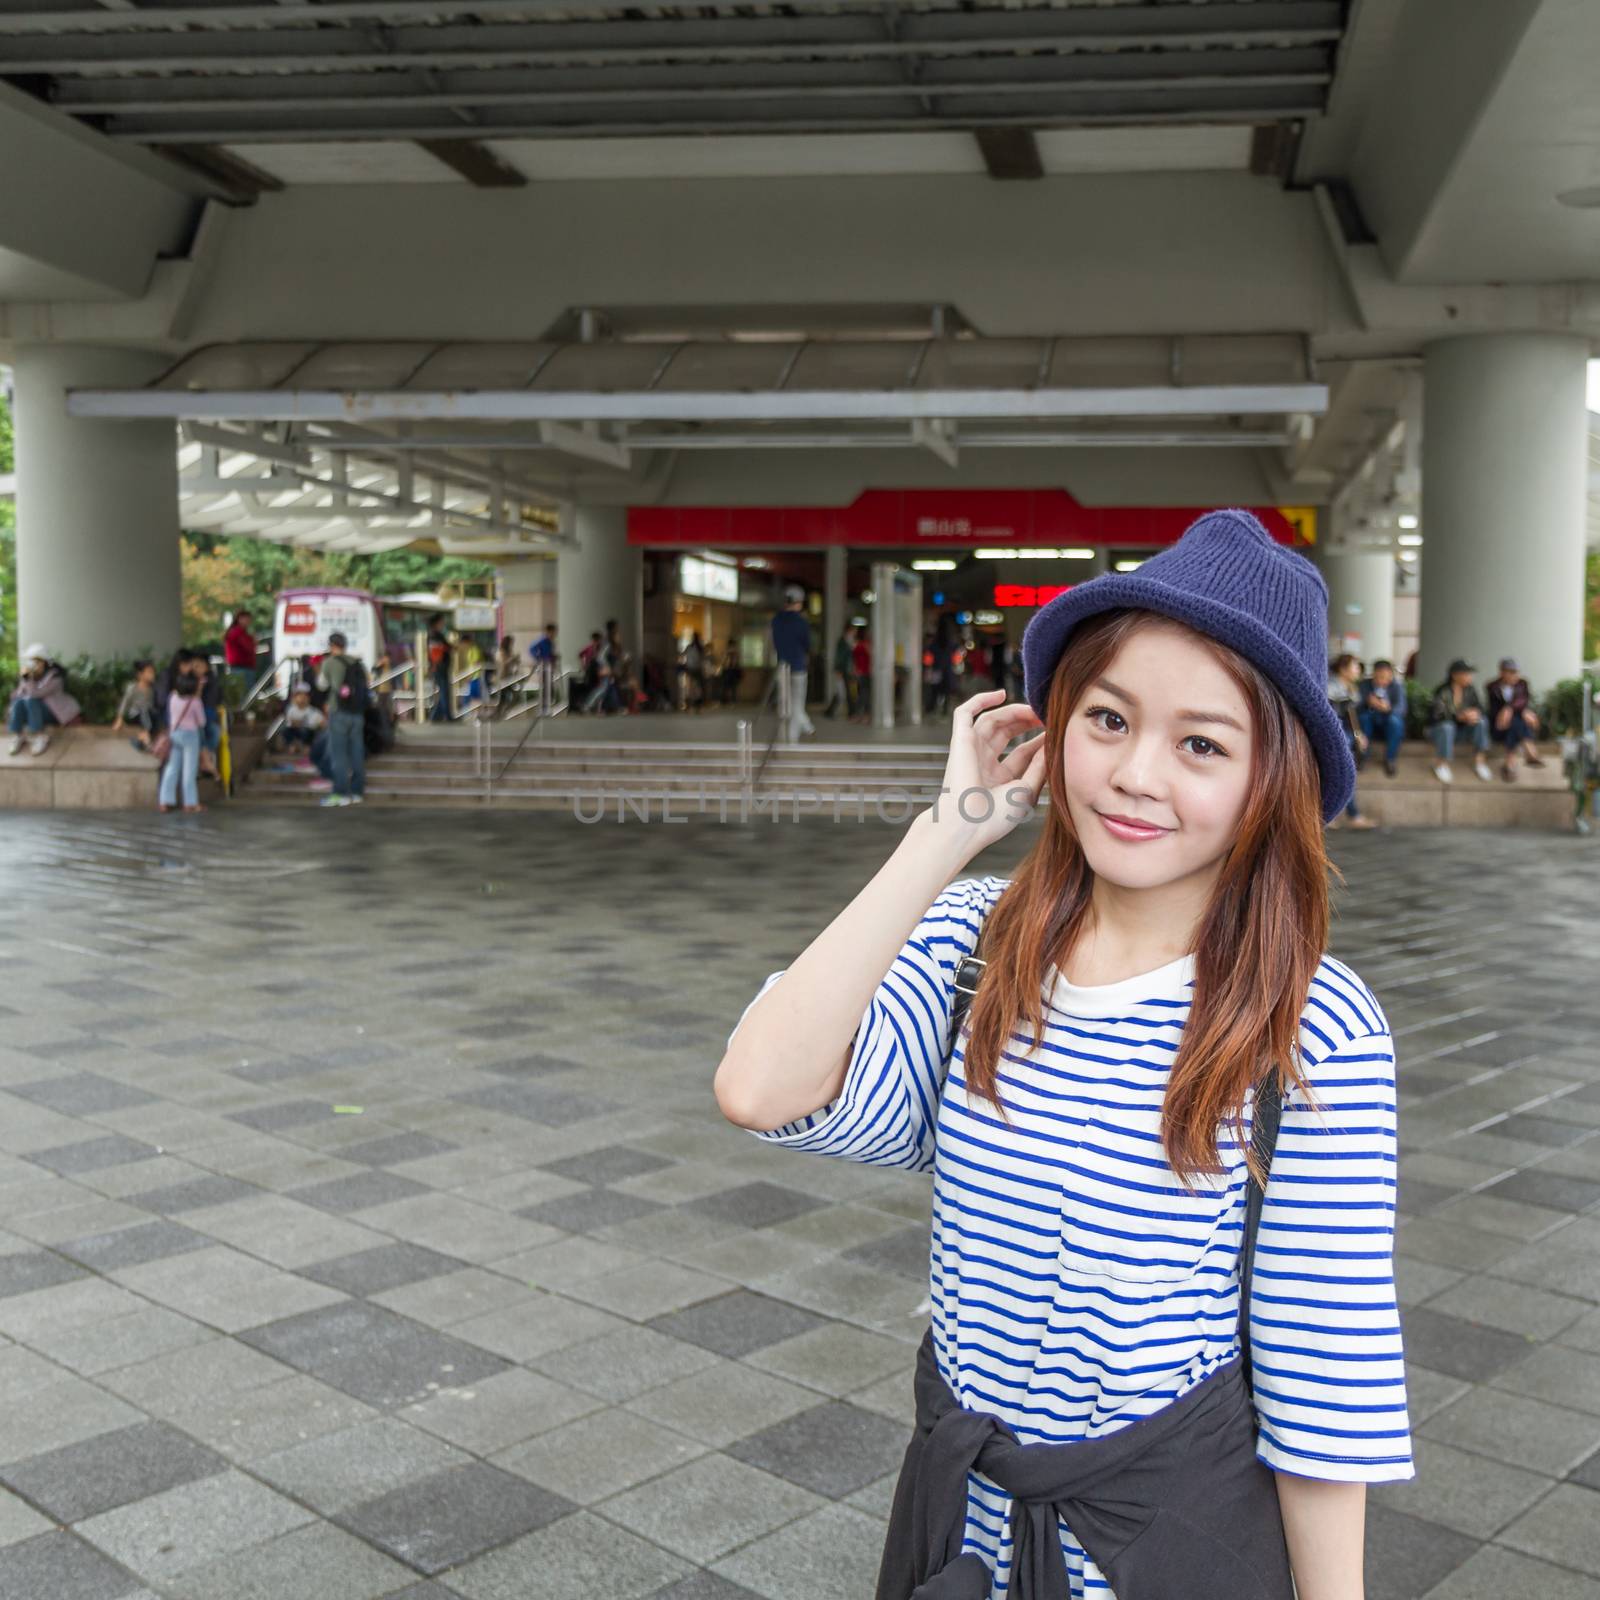 Asian woman outside subway station by imagesbykenny